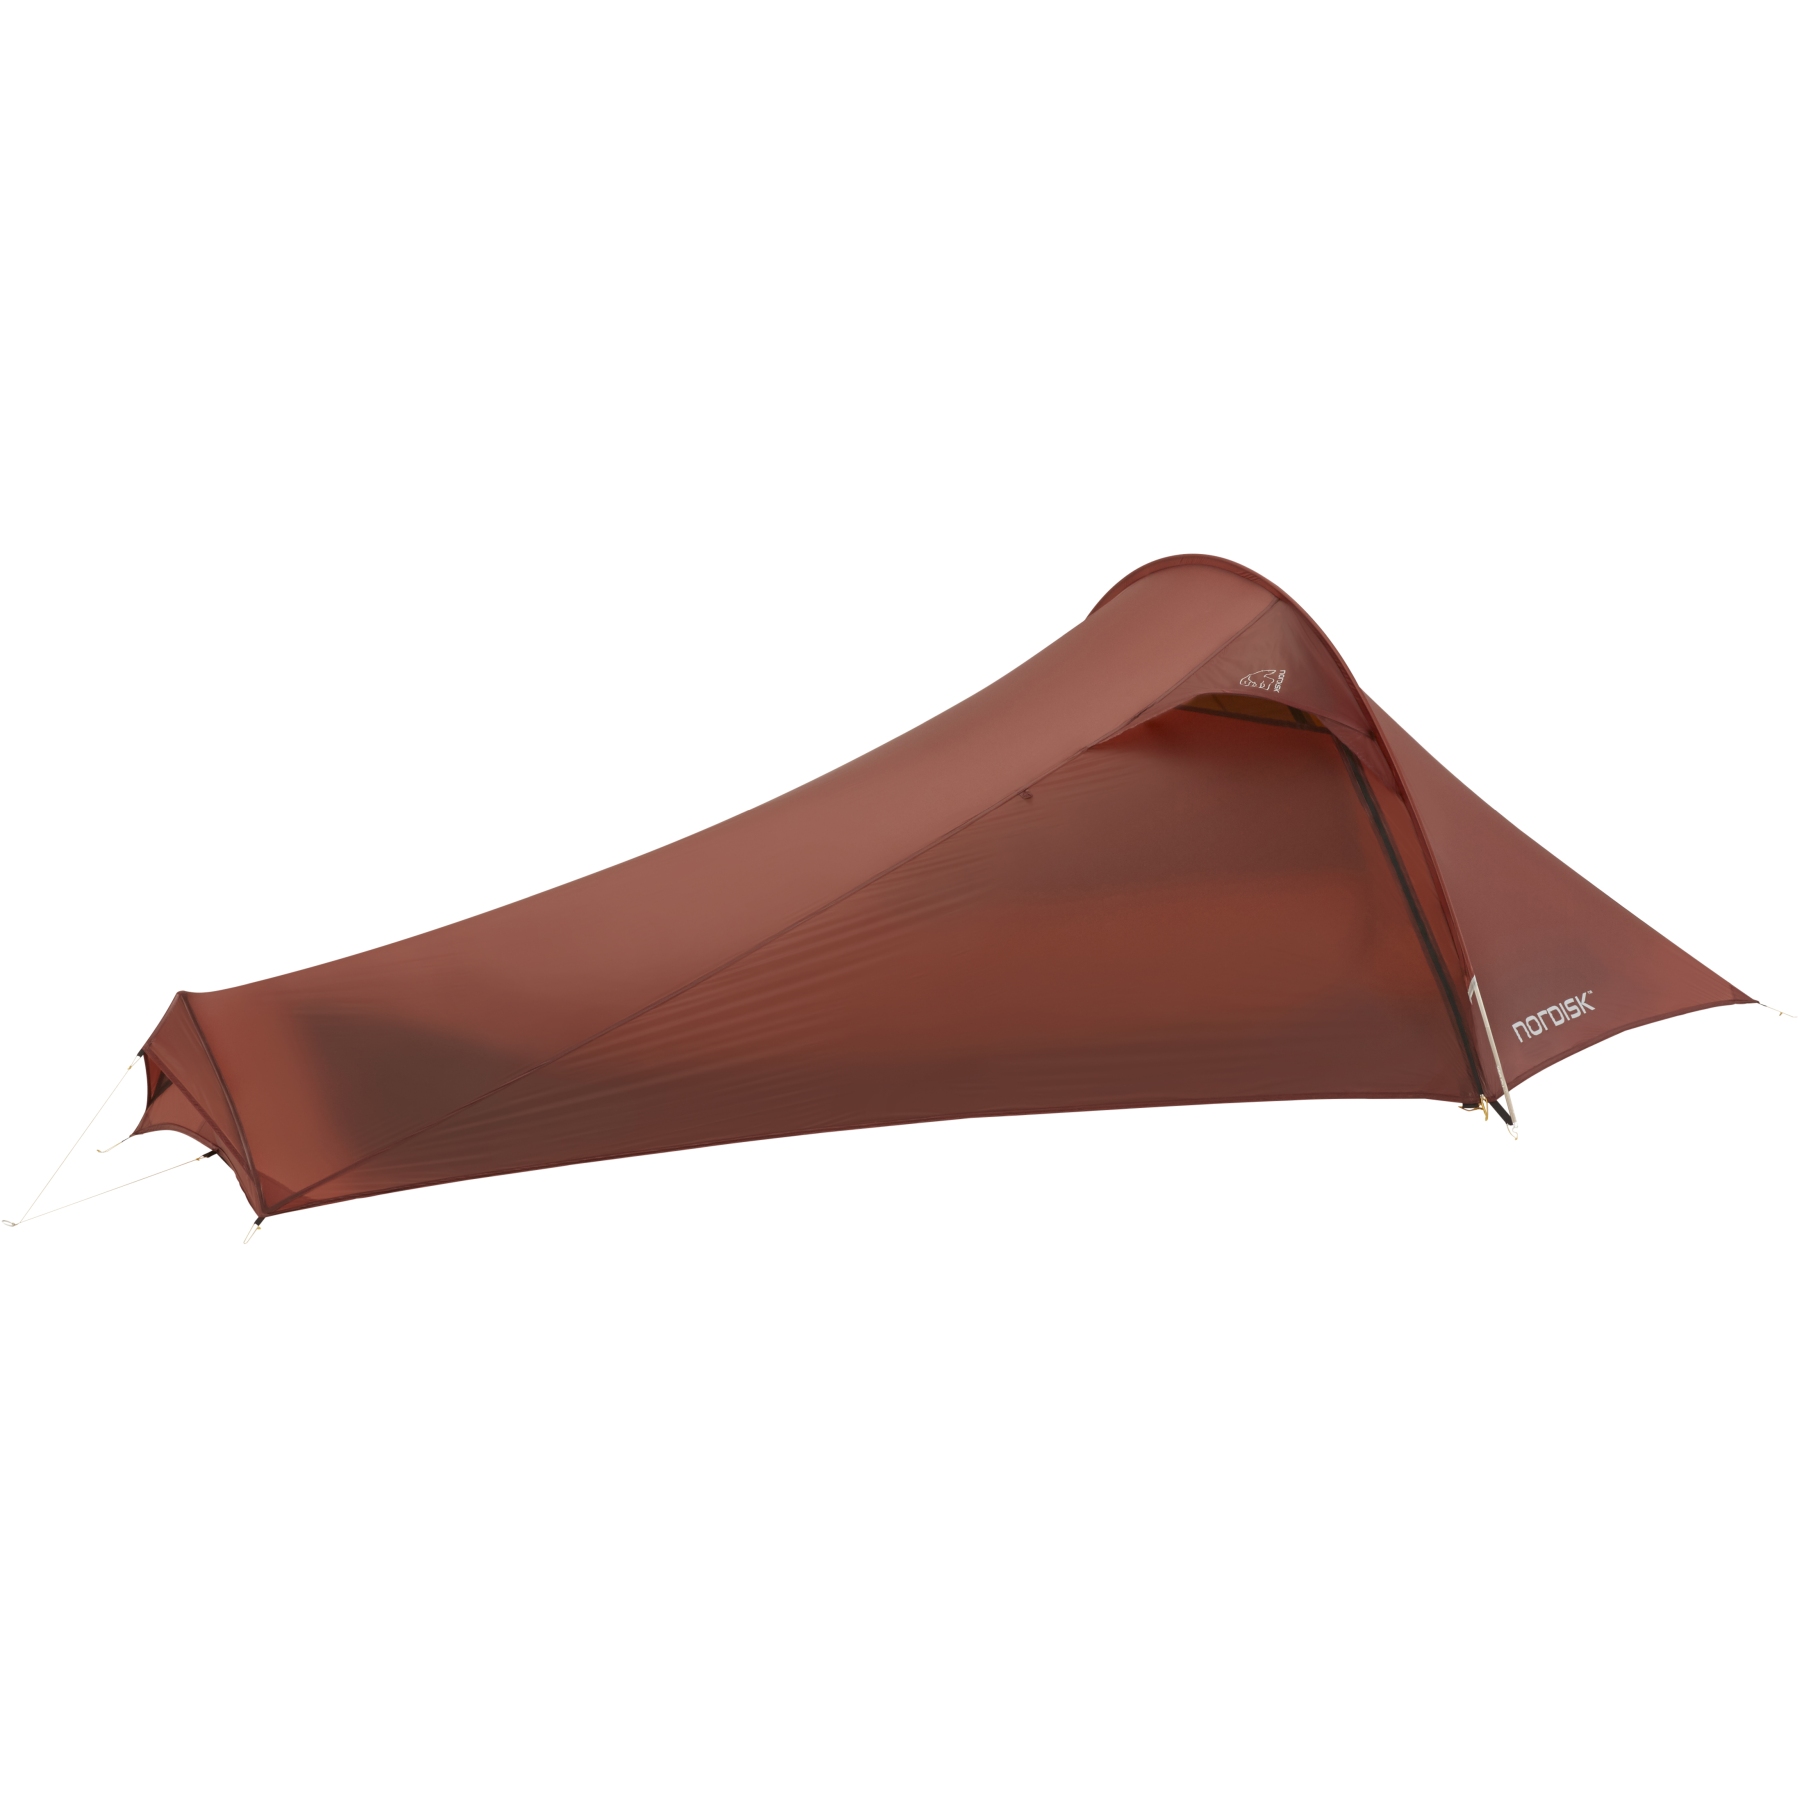 Picture of Nordisk Lofoten 1 ULW Tent - Burnt Red